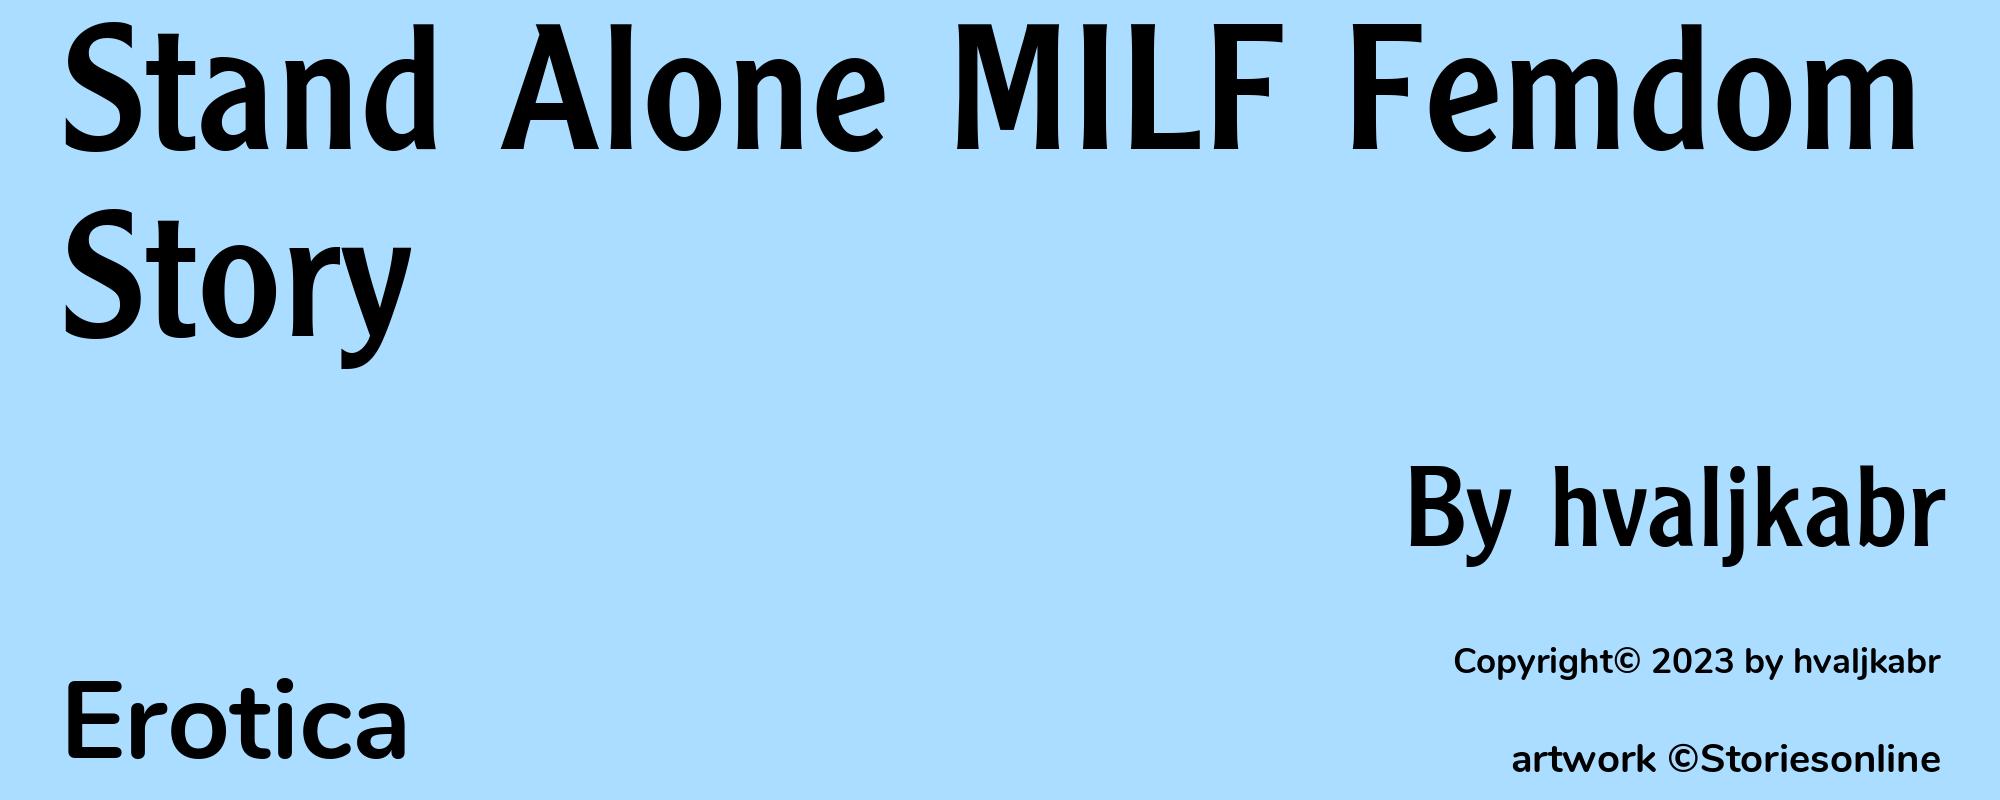 Stand Alone MILF Femdom Story - Cover